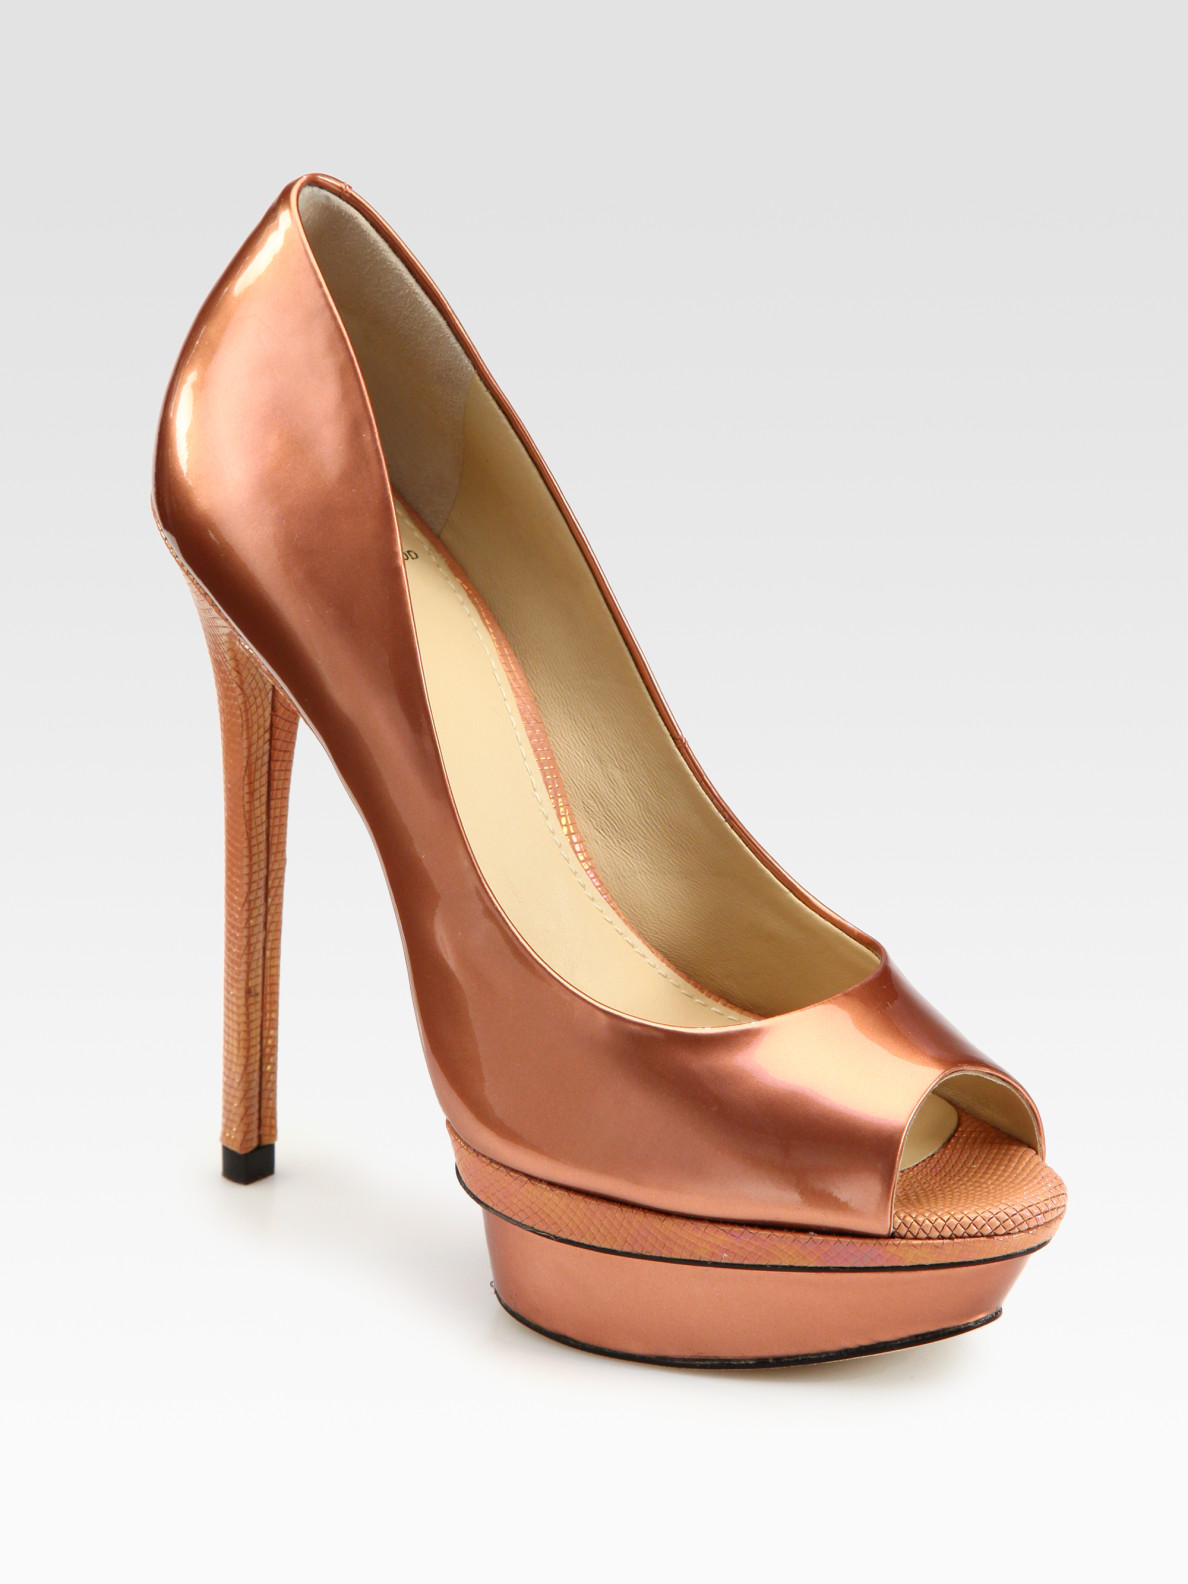 B brian atwood Florencia Patent Leather Peep Toe Platform Pumps in ...